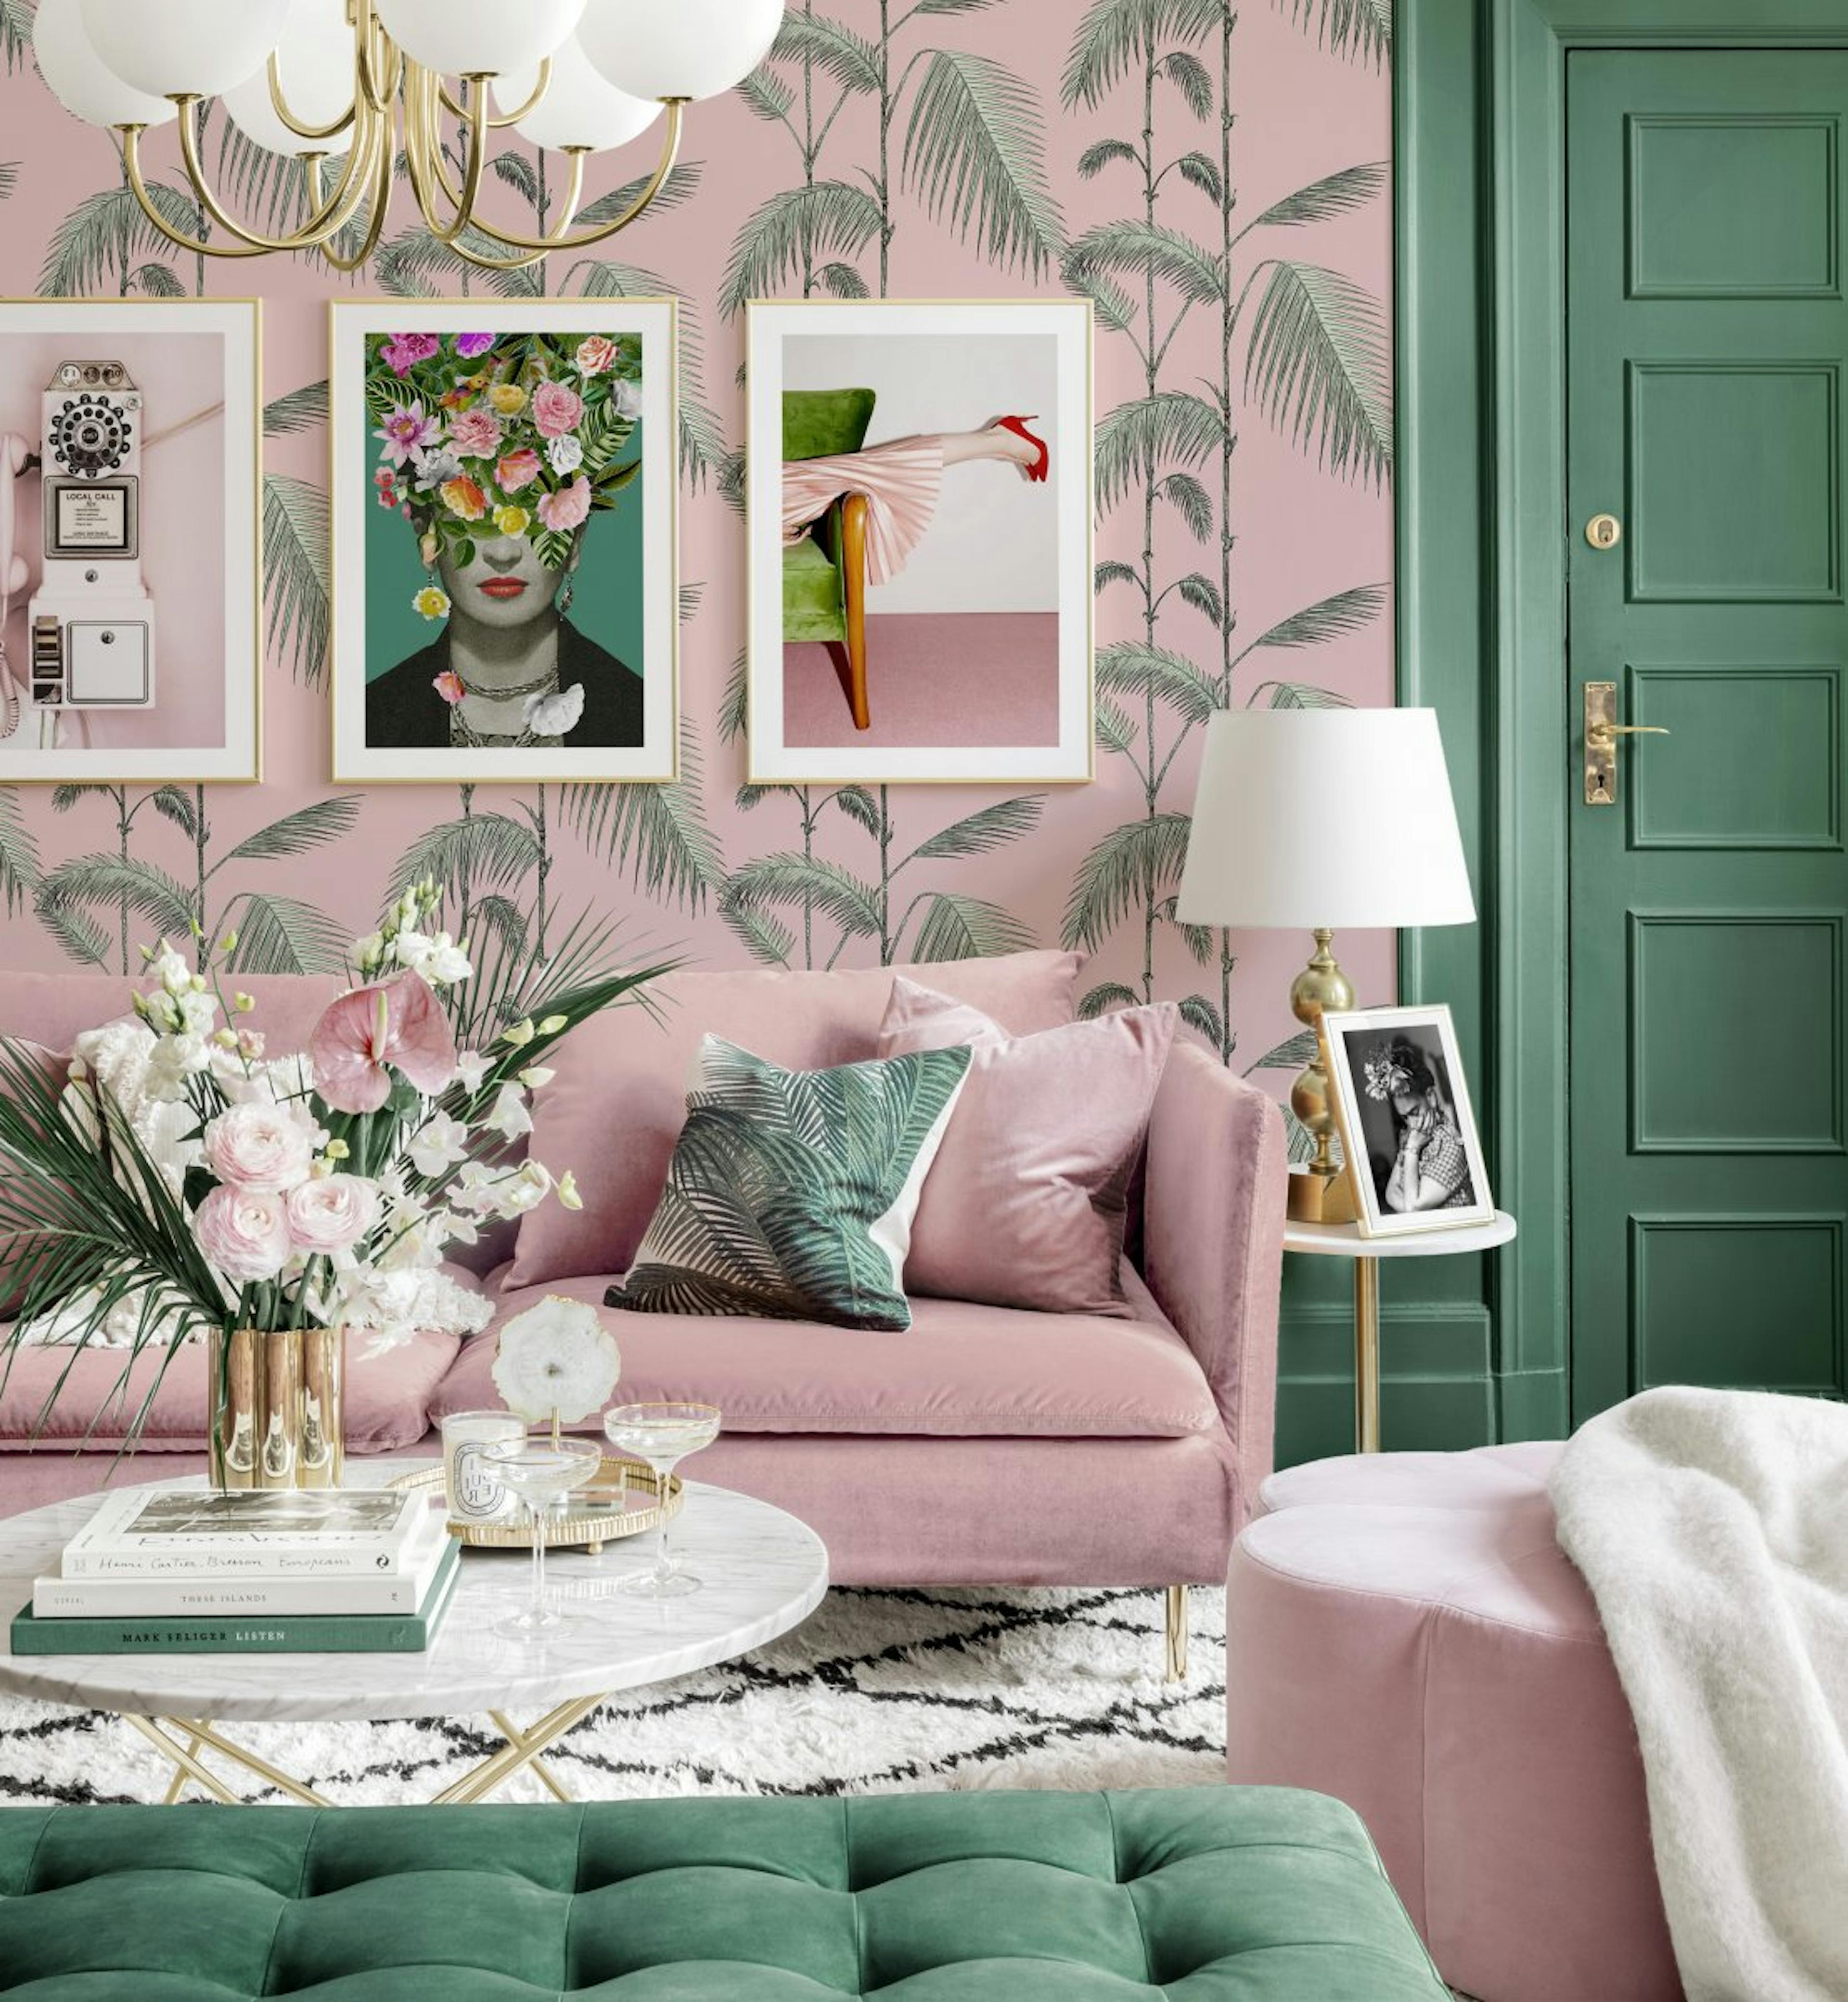 Good vibes gallery wall chinoiserie frida kahlo prints pink and green living room